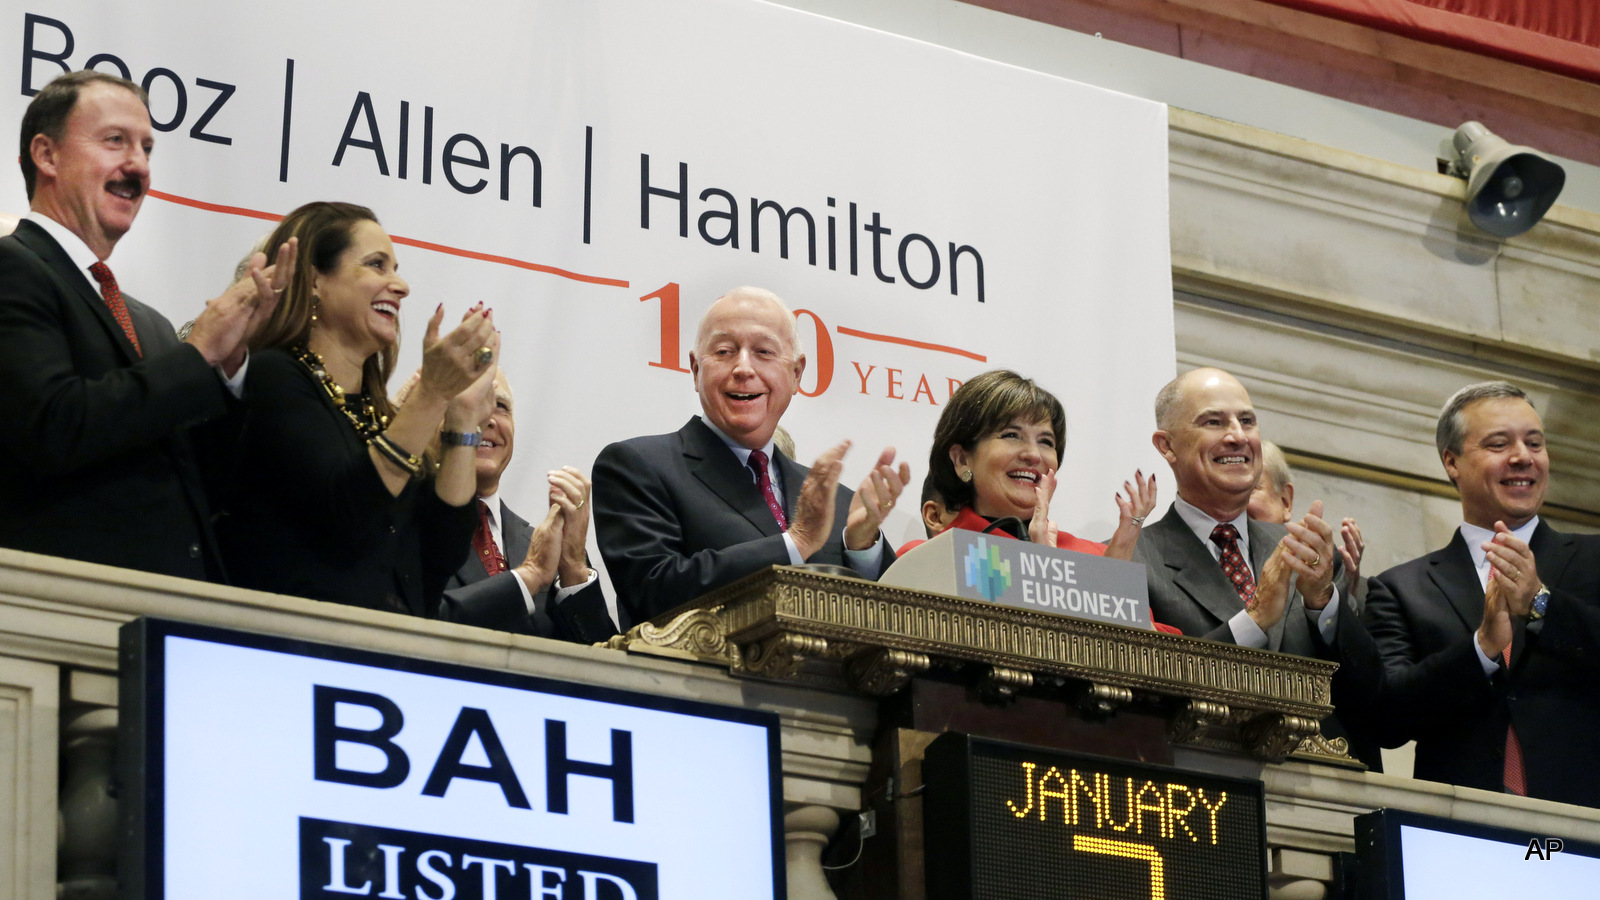 Booz Allen Hamilton Chairman and CEO Ralph Shrader, center, and guests attend the opening bell ceremony at the New York Stock Exchange.